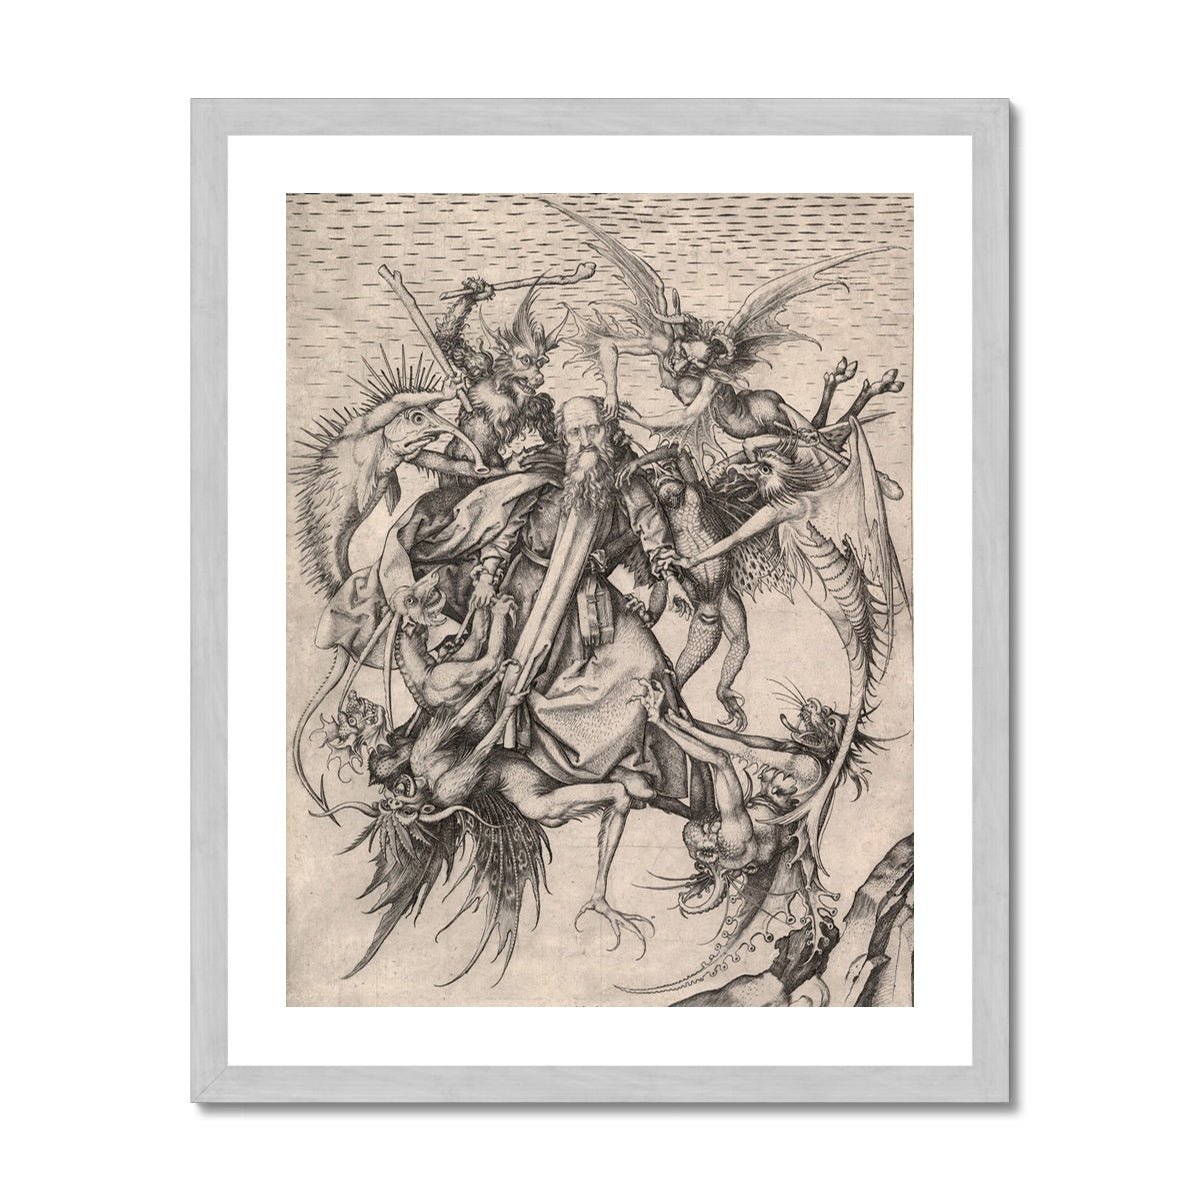 The Temptation of Saint Anthony | Surreal Schongauer Gothic Devil and Demons | Occult Antique Framed Art Print - Sacred Surreal